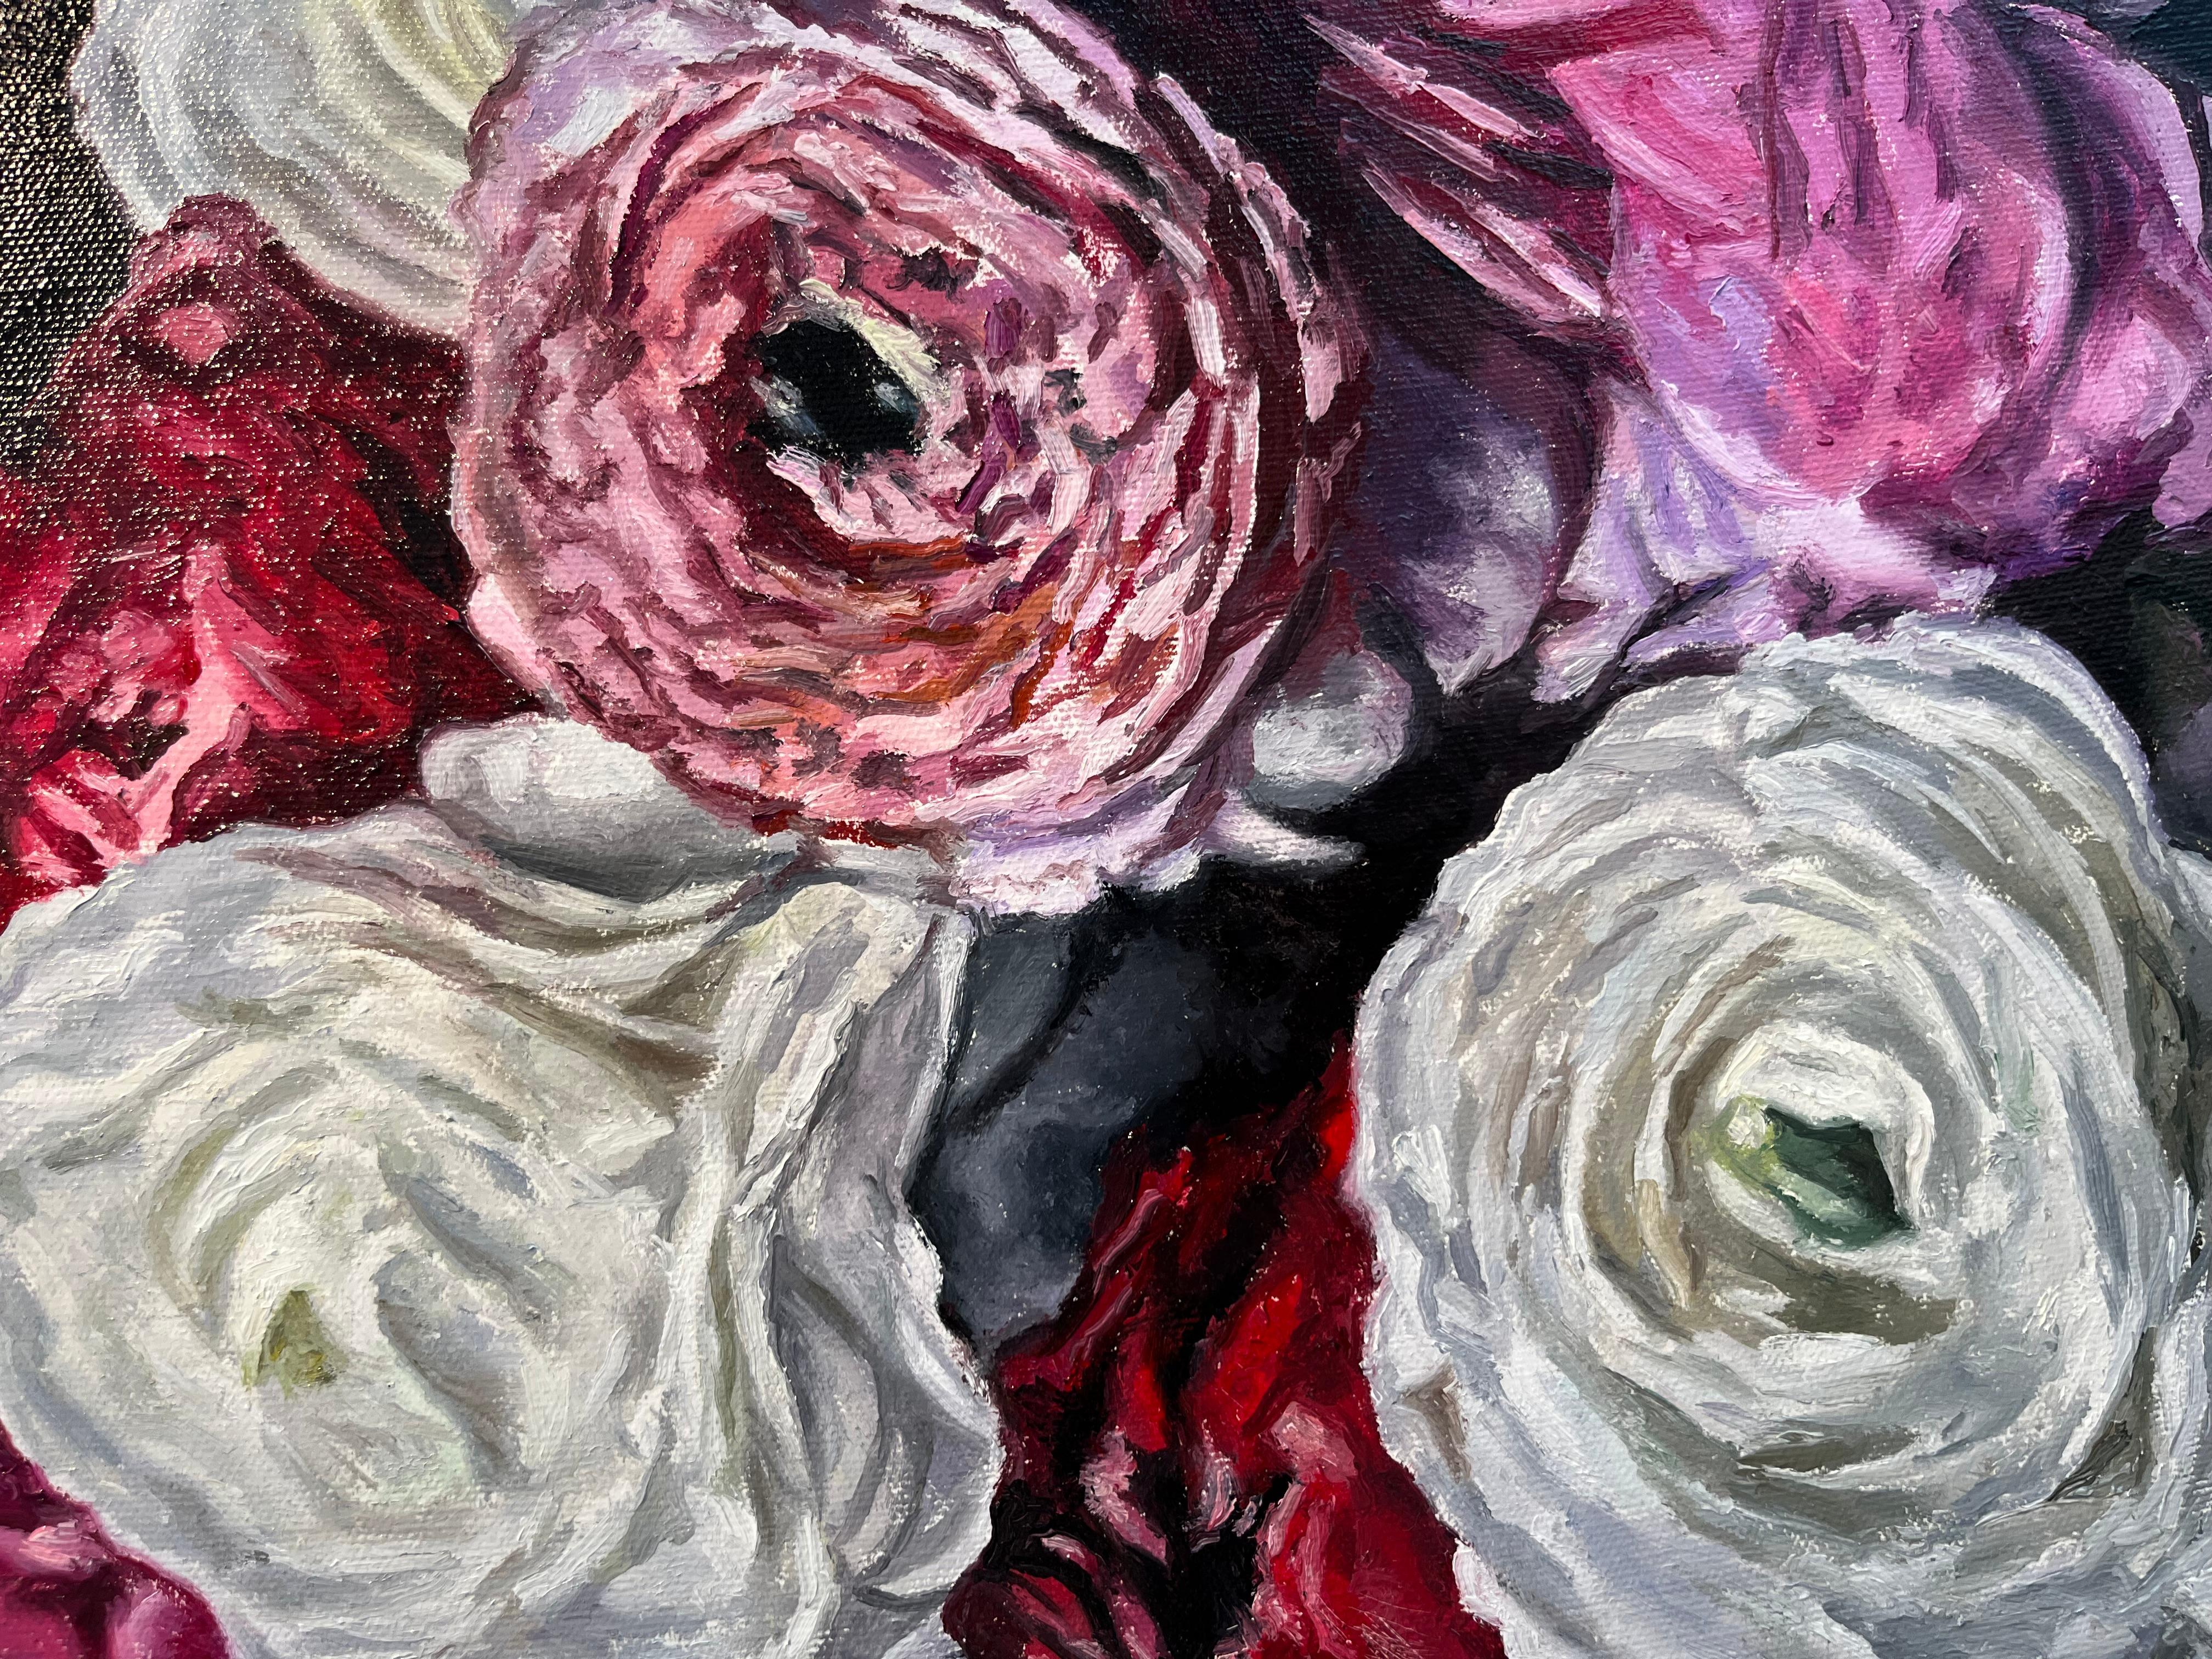 Ranunculus Study 2-original modern realism flowers oil painting-contemporary art - Impressionist Painting by Robert Lemay